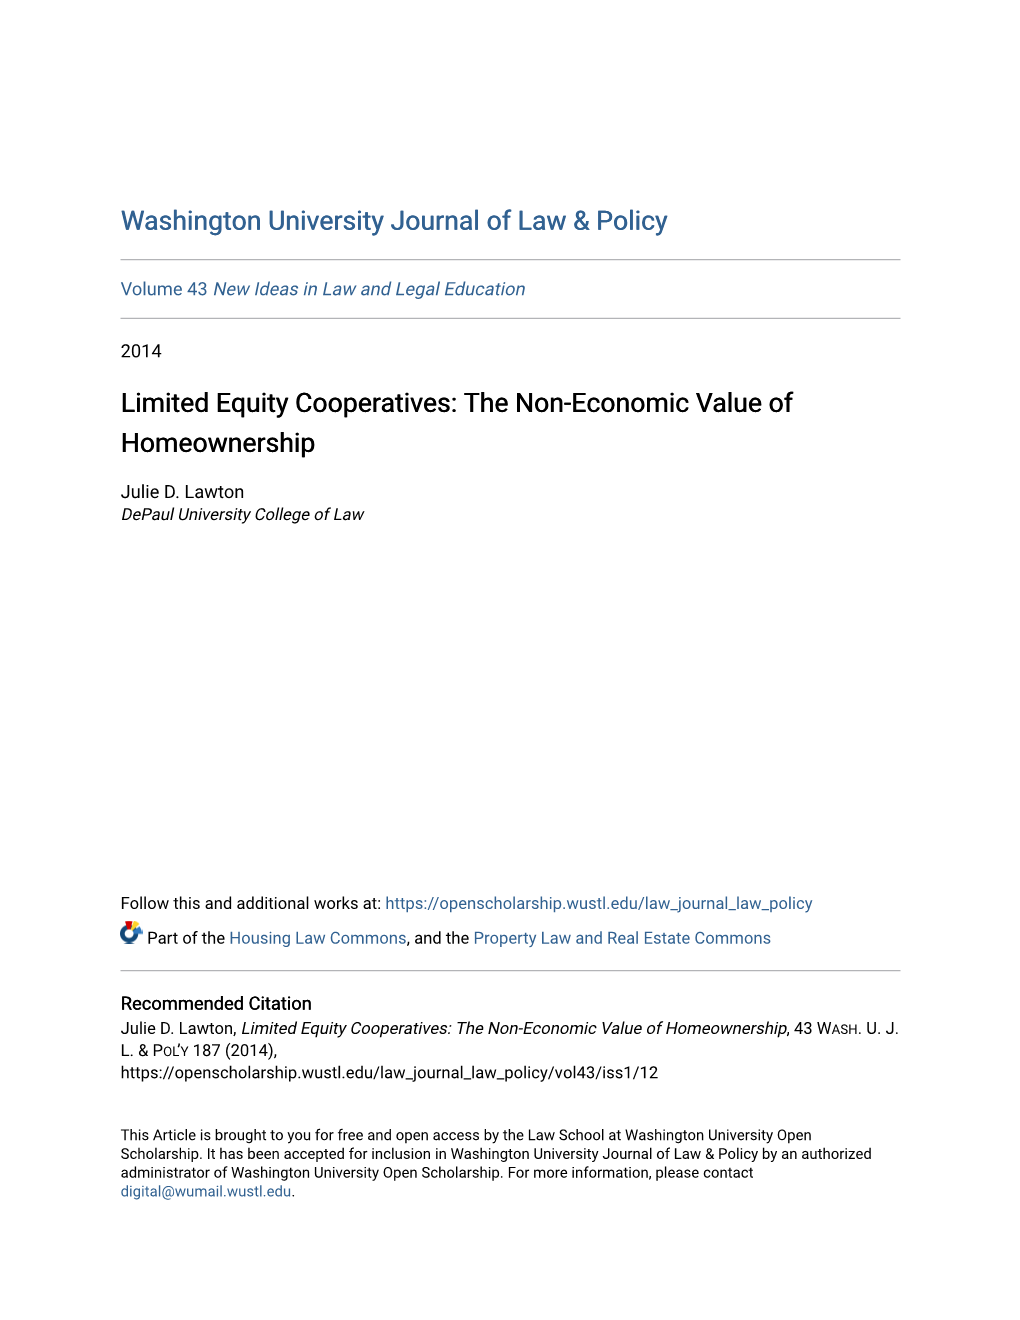 Limited Equity Cooperatives: the Non-Economic Value of Homeownership